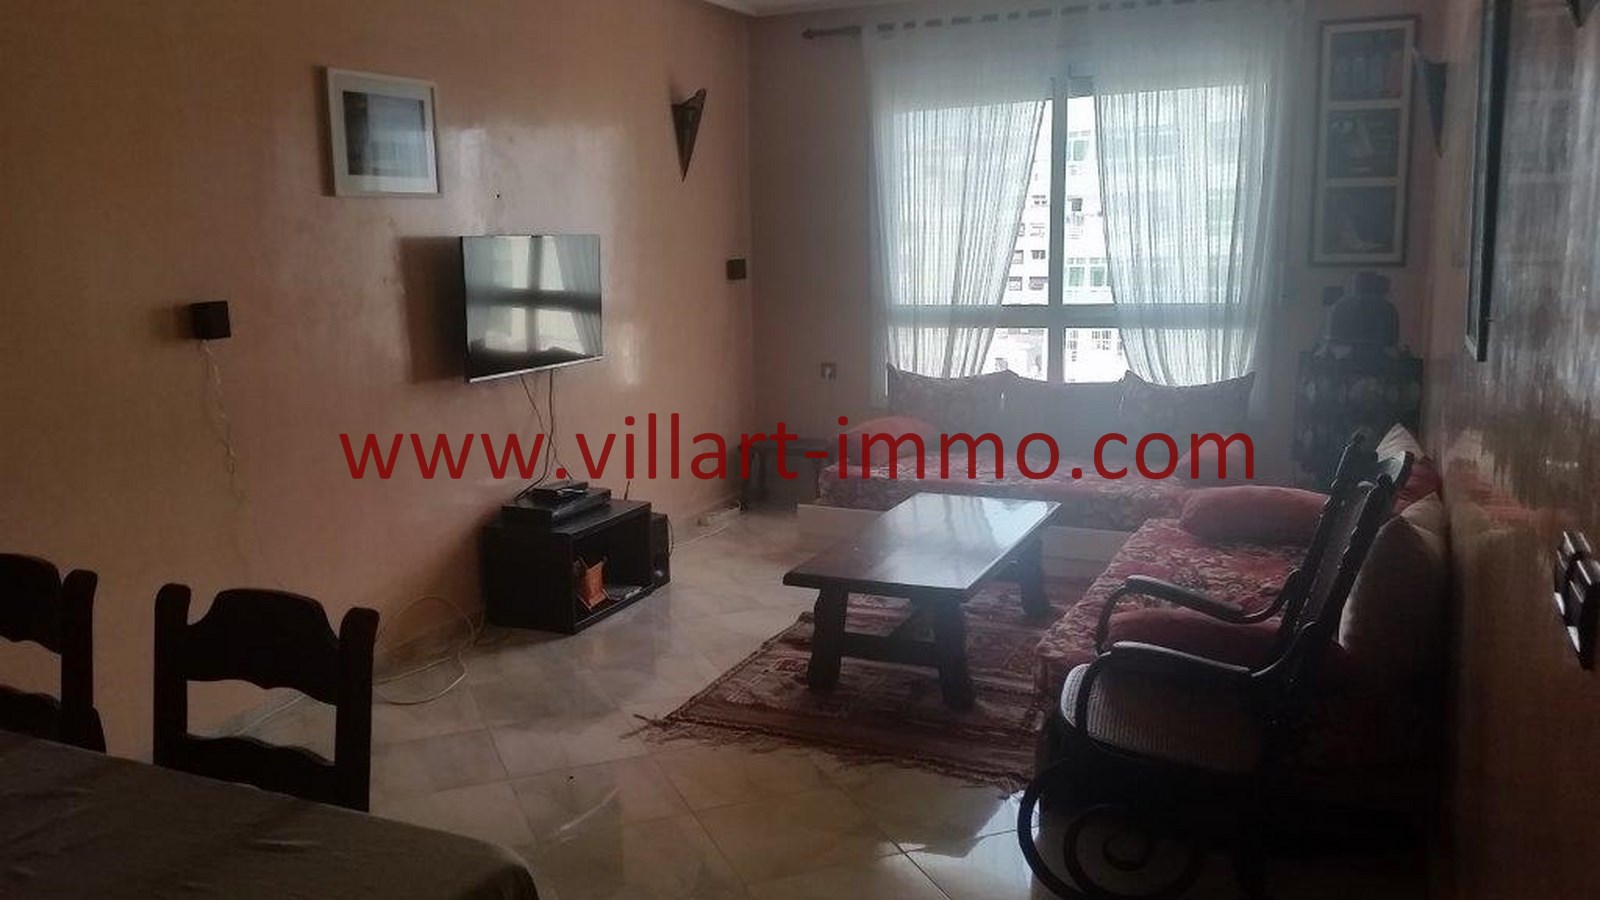 1-location-appartement-meuble-tanger-salon-l856-villart-immo-agence-immobiliere